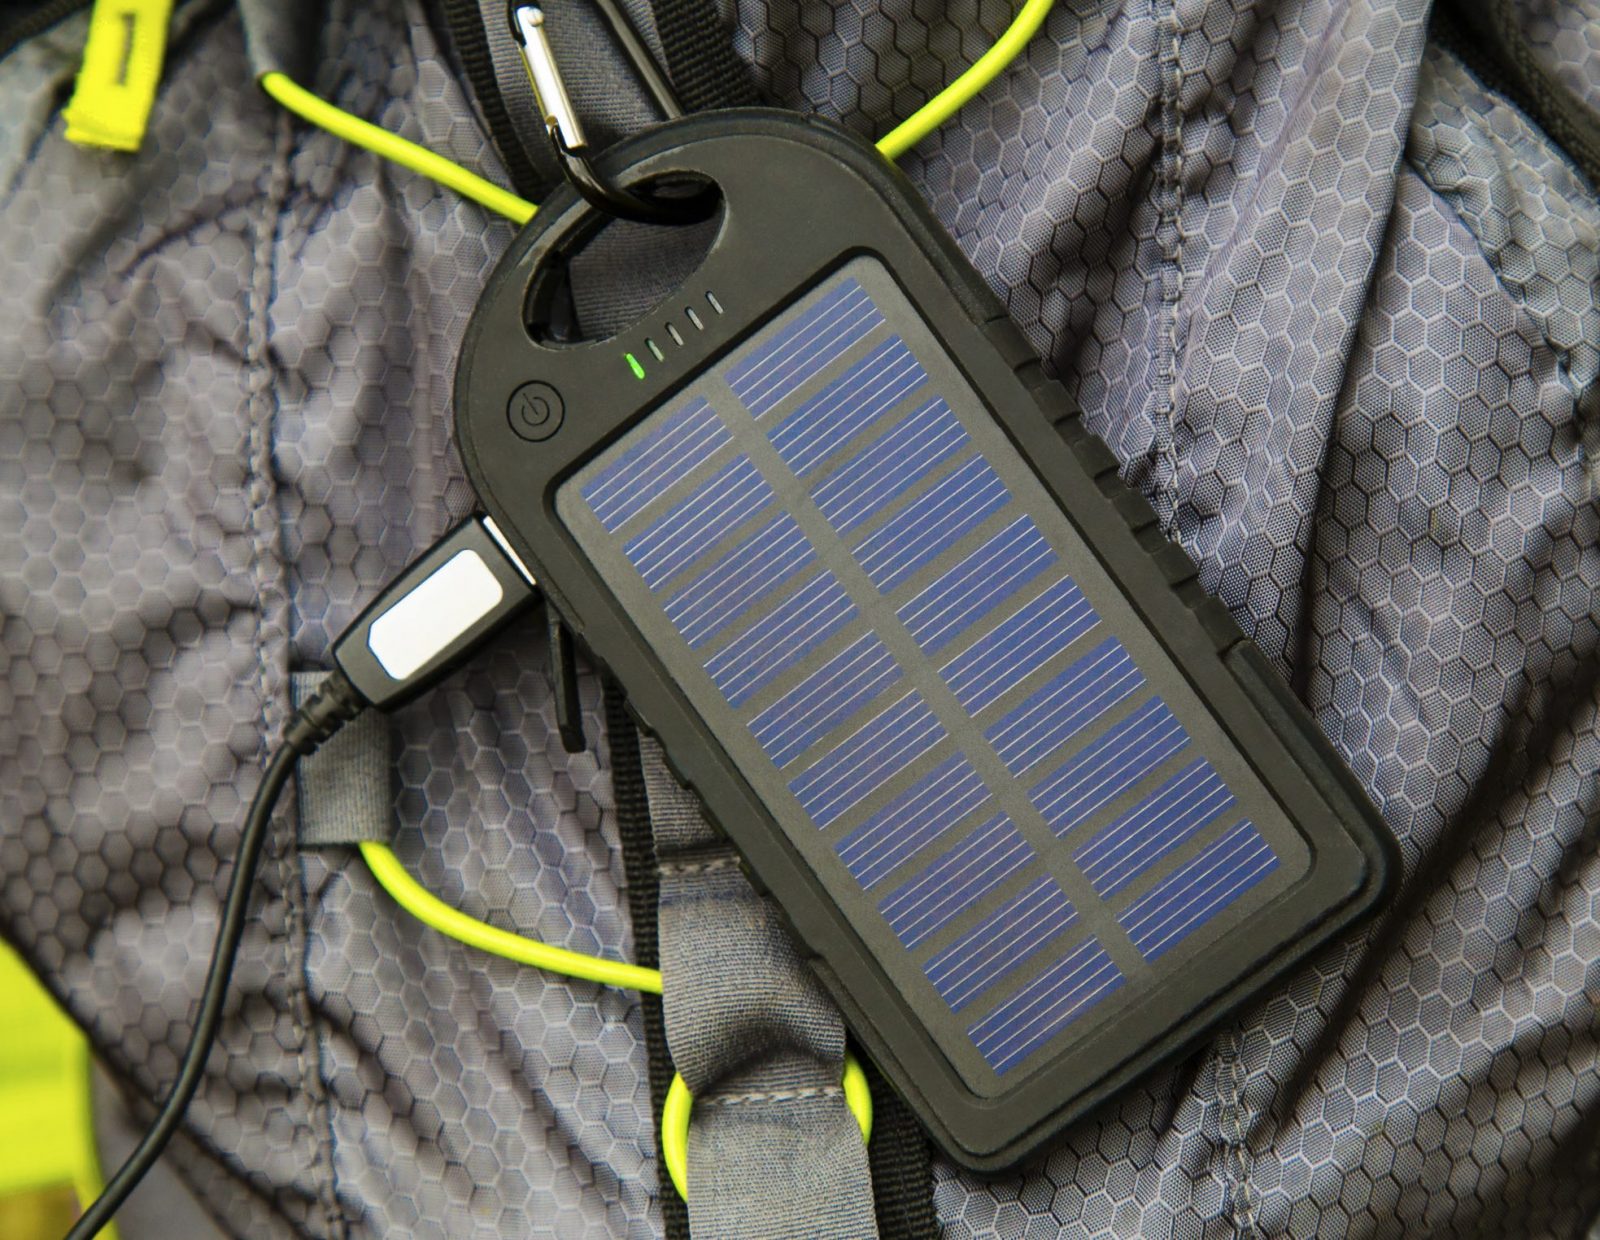 A close up of a solar charger for phones.